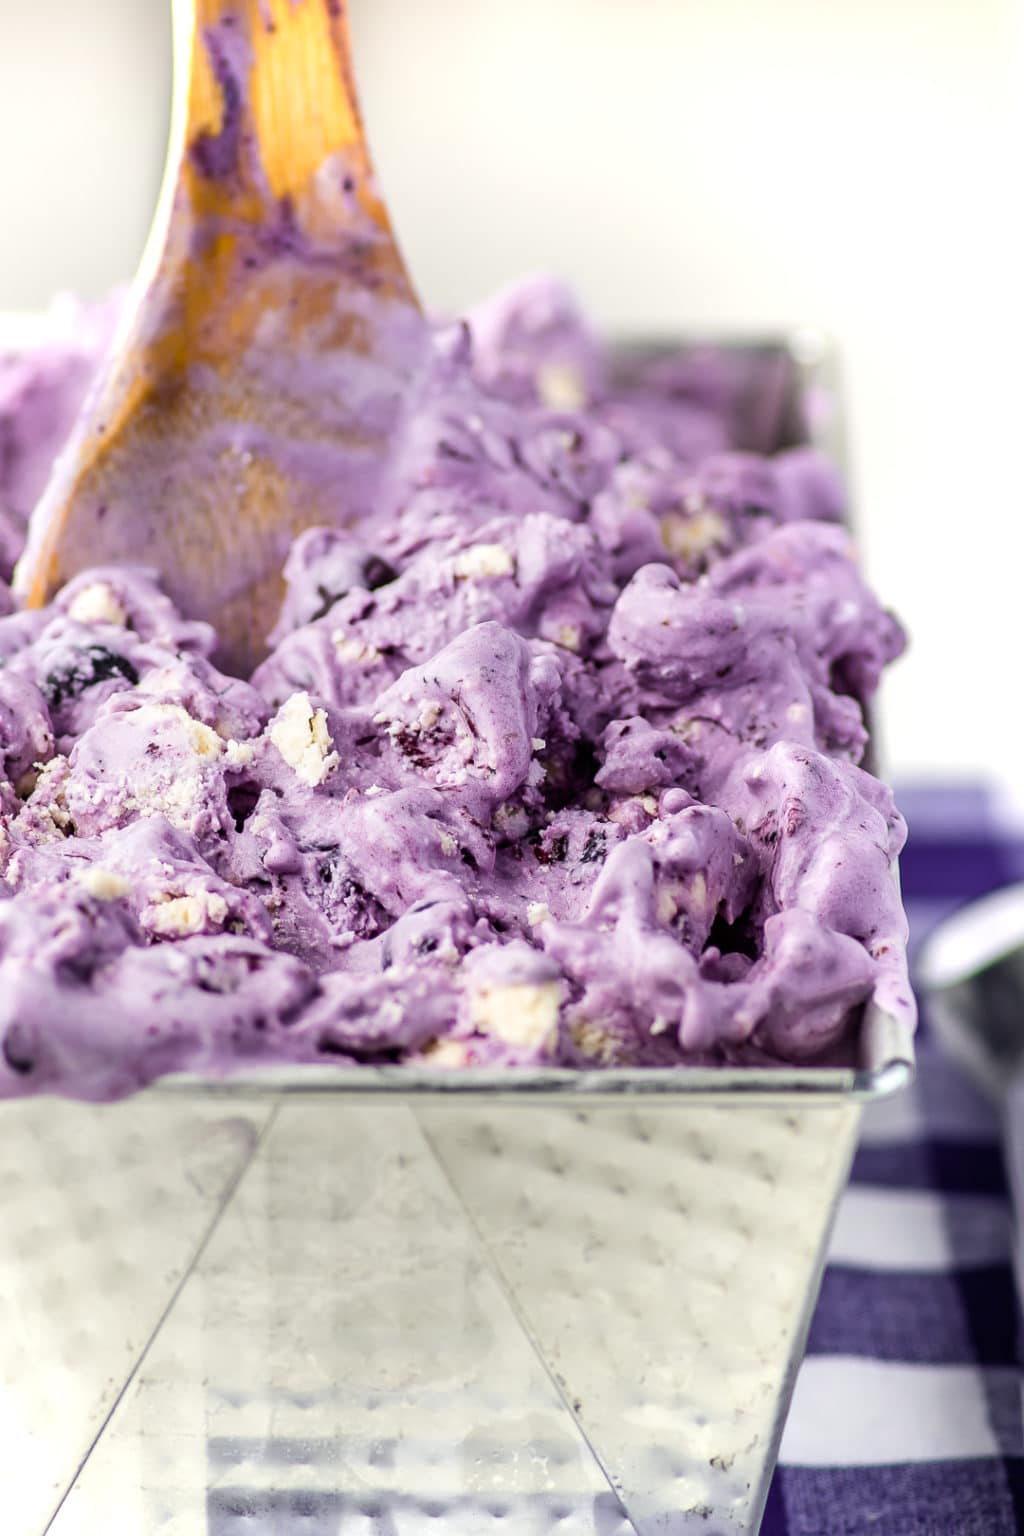 A bright lavender colored blueberry cheesecake ice cream in a silver loaf pan and wooden spoon